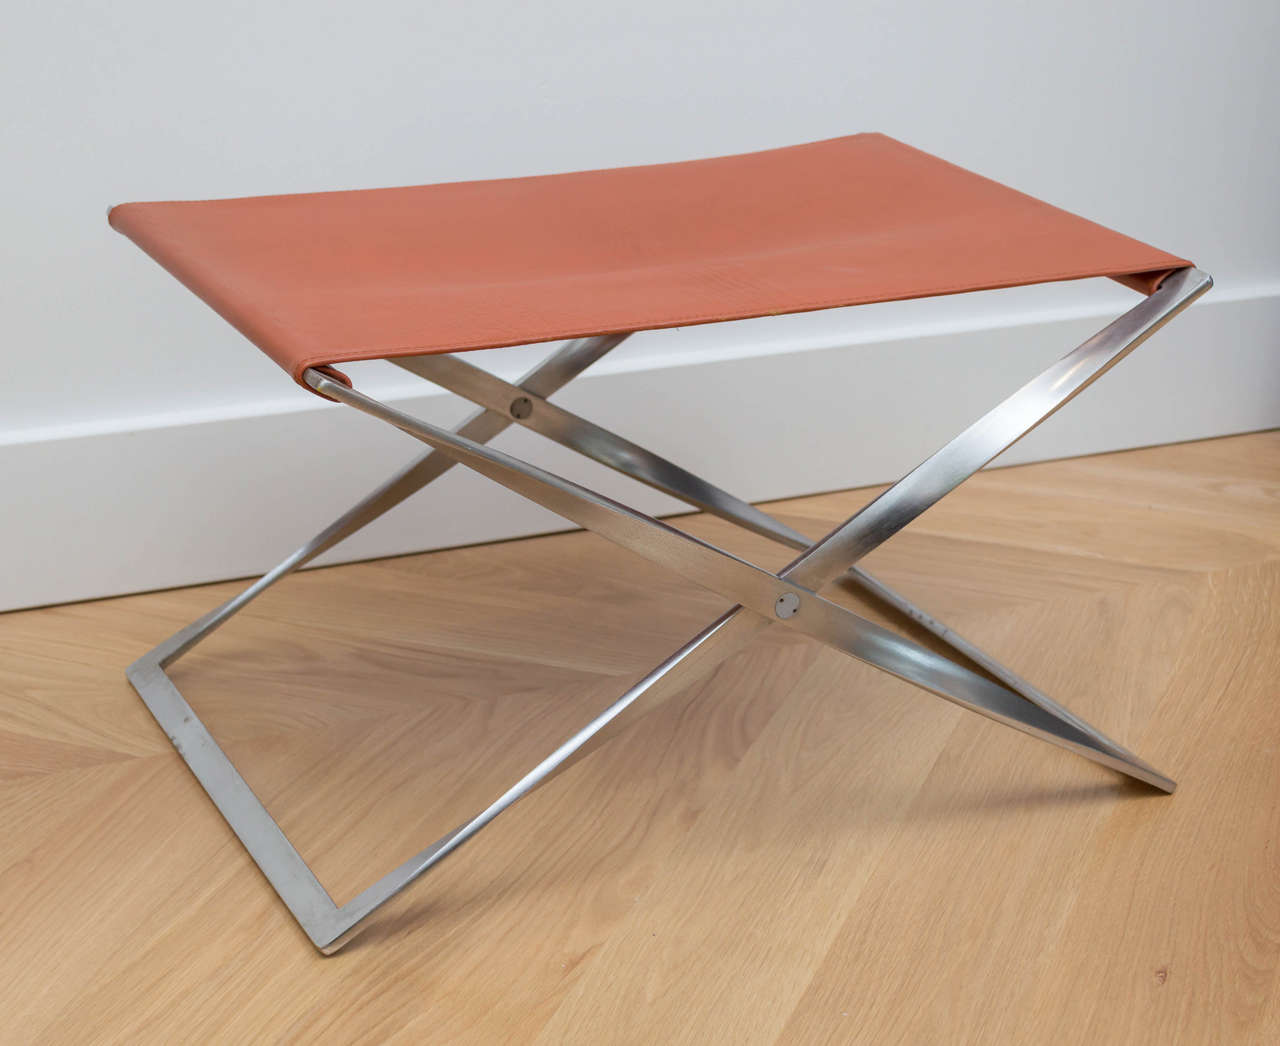 Matte chromed steel folding base with  cognac sling seat. Very good original condition. Made by Fritz Hansen. This example is from 1980s.